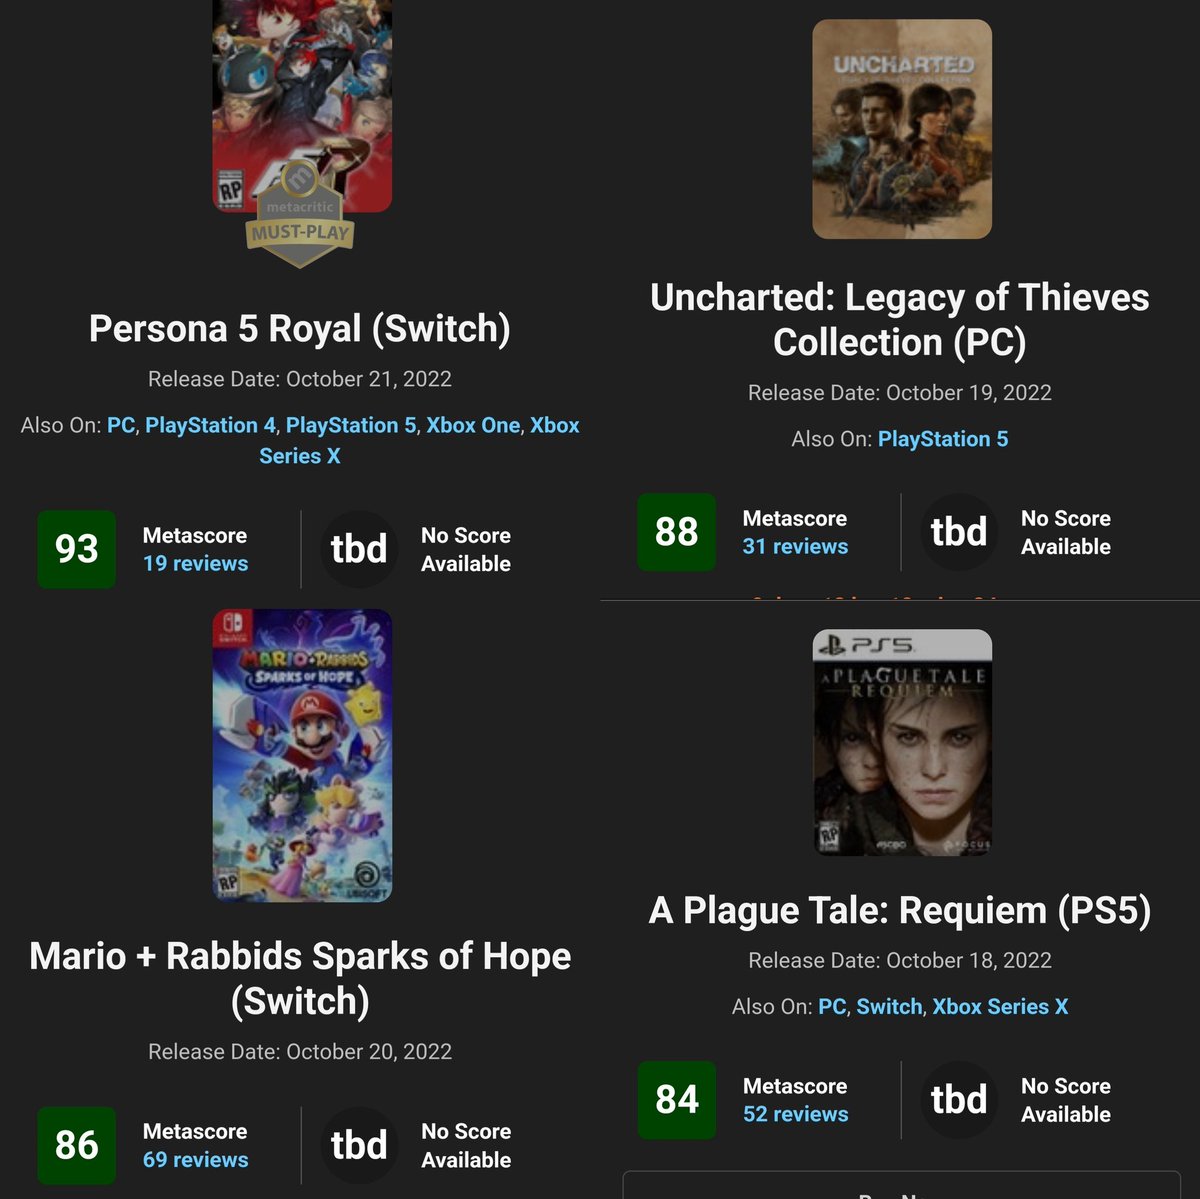 Benji-Sales on X: Heck of a week for new releases Metacritic (platform  score range) • Persona 5 Royal: 93-97 • Uncharted Legacy of Thieves PC: 88  • Mario + Rabbids Sparks of